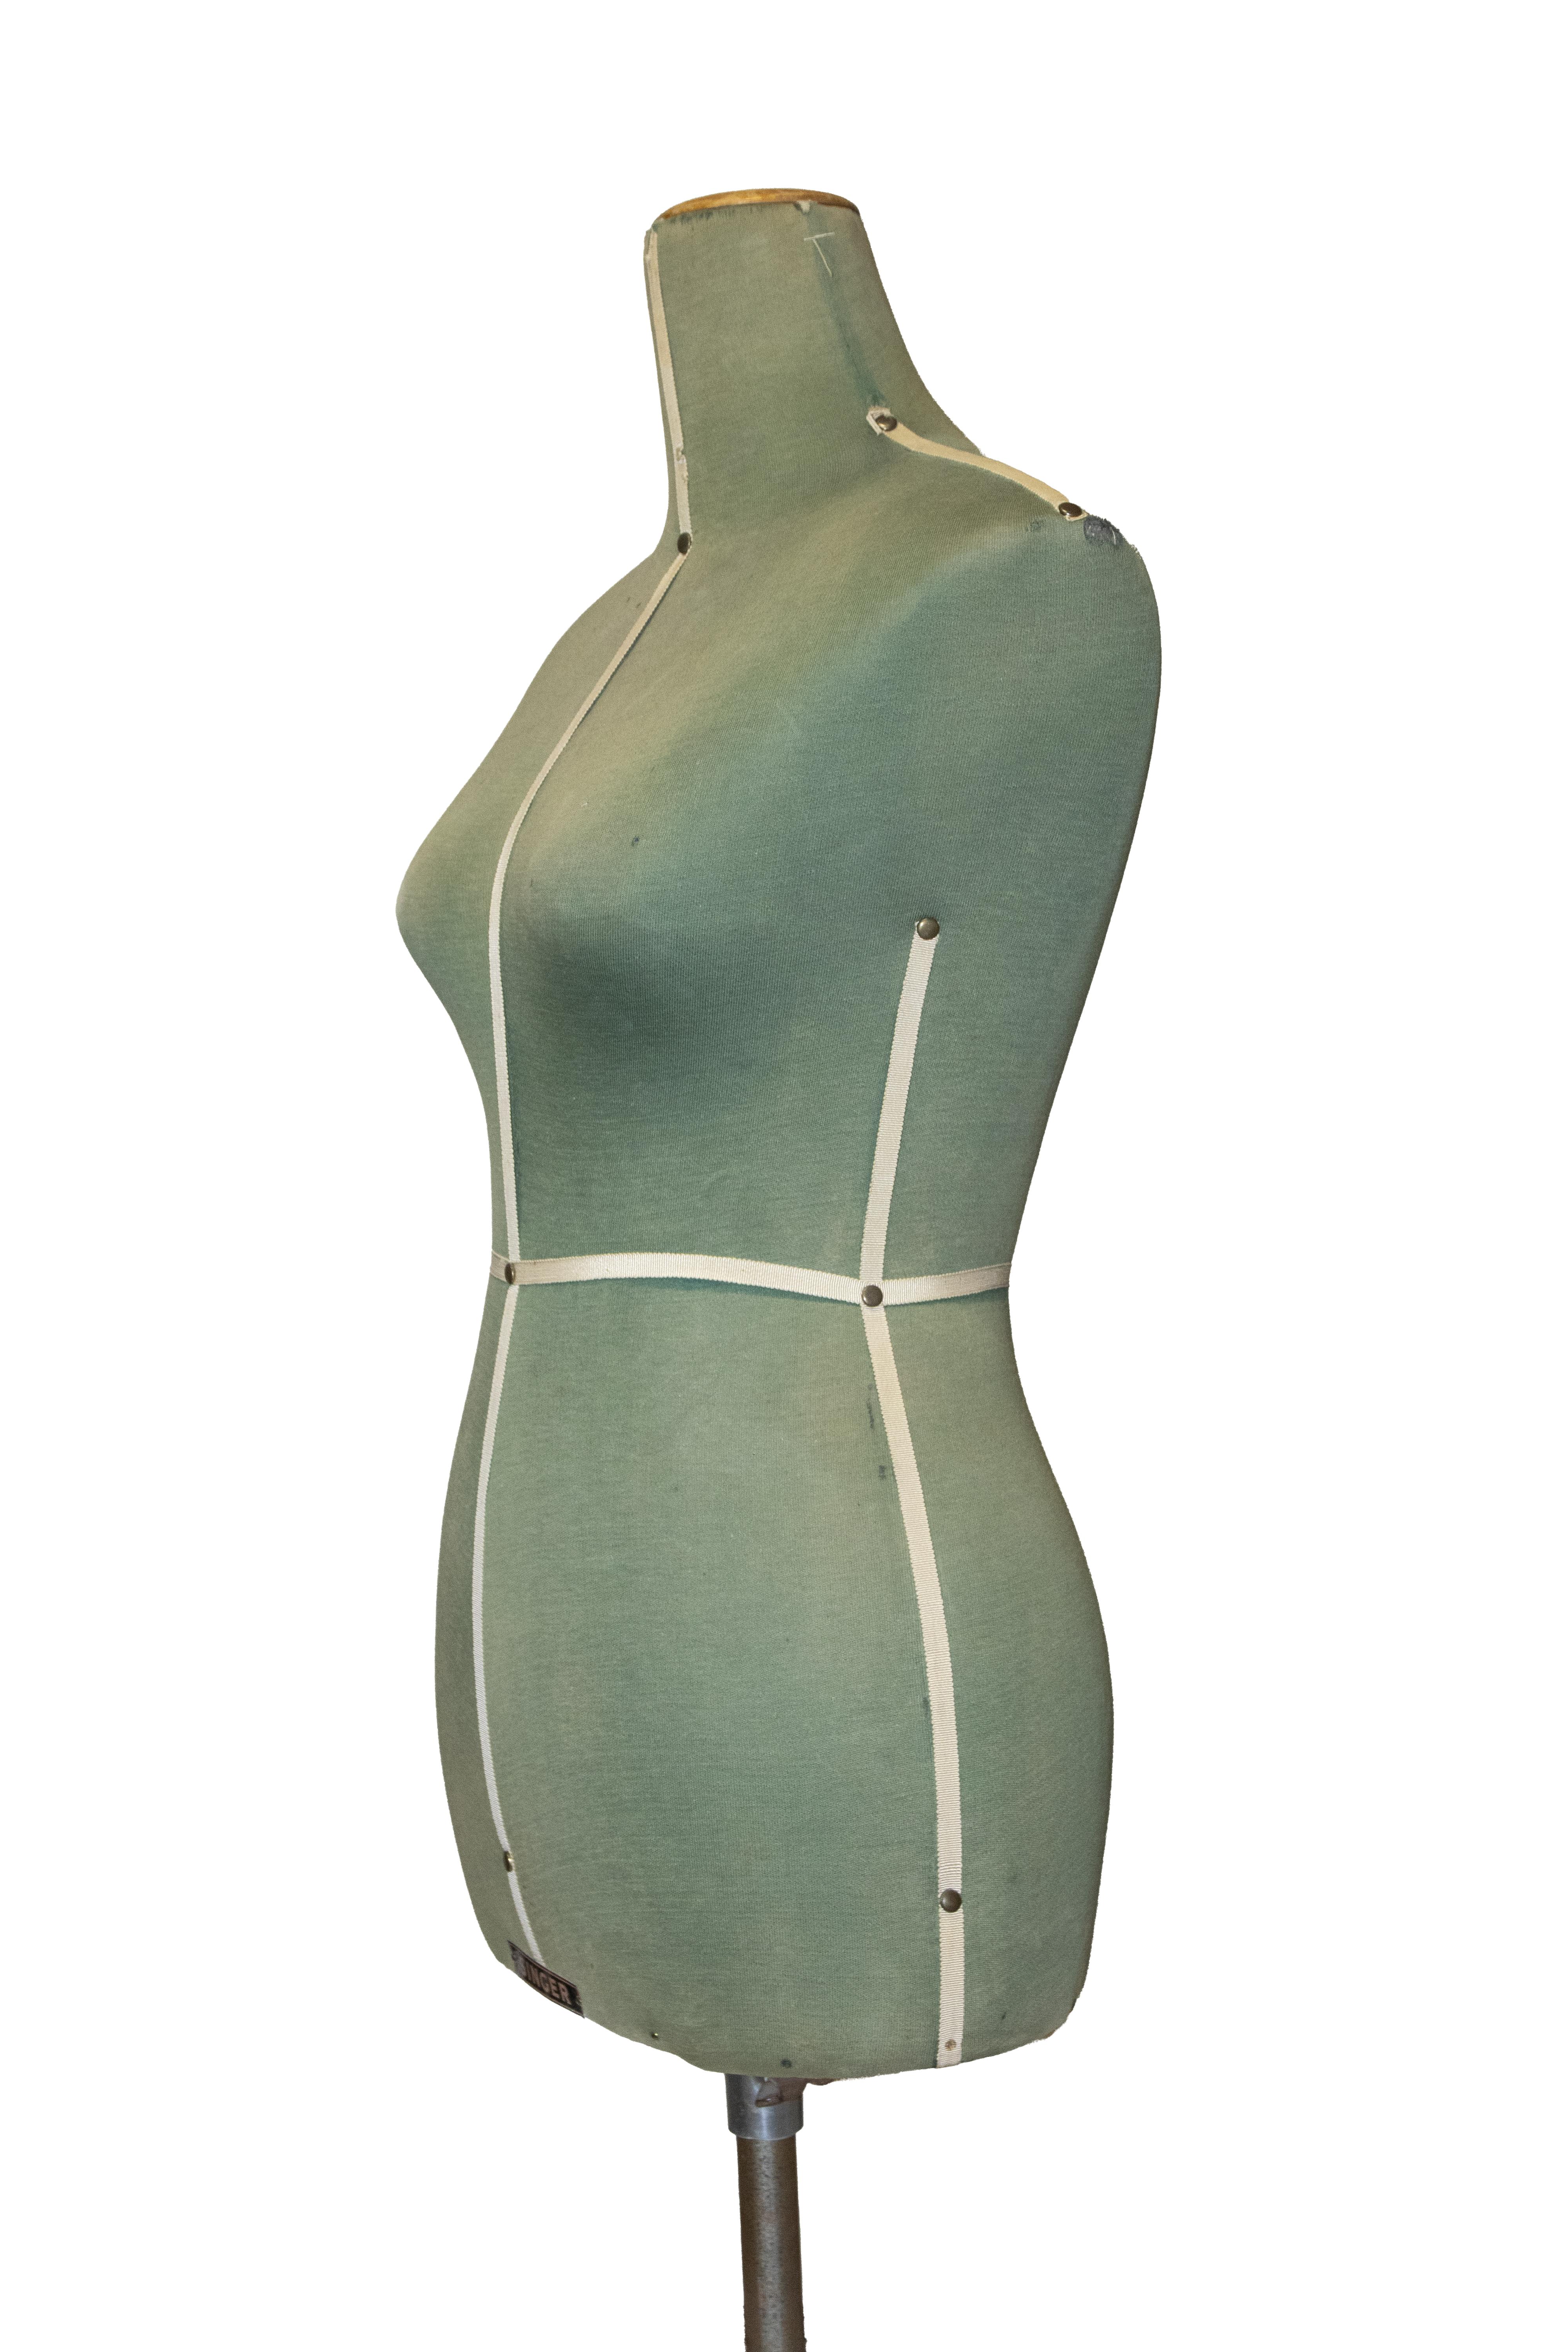 Vintage Singer tailor's mannequin with metal tripod.

Stunning green vintage tailor's mannequin from the 1960s, extendable and complete.

It has a metal tripod base.

The metal label with the Singer brand is placed at its base.

75 x 40 ; total